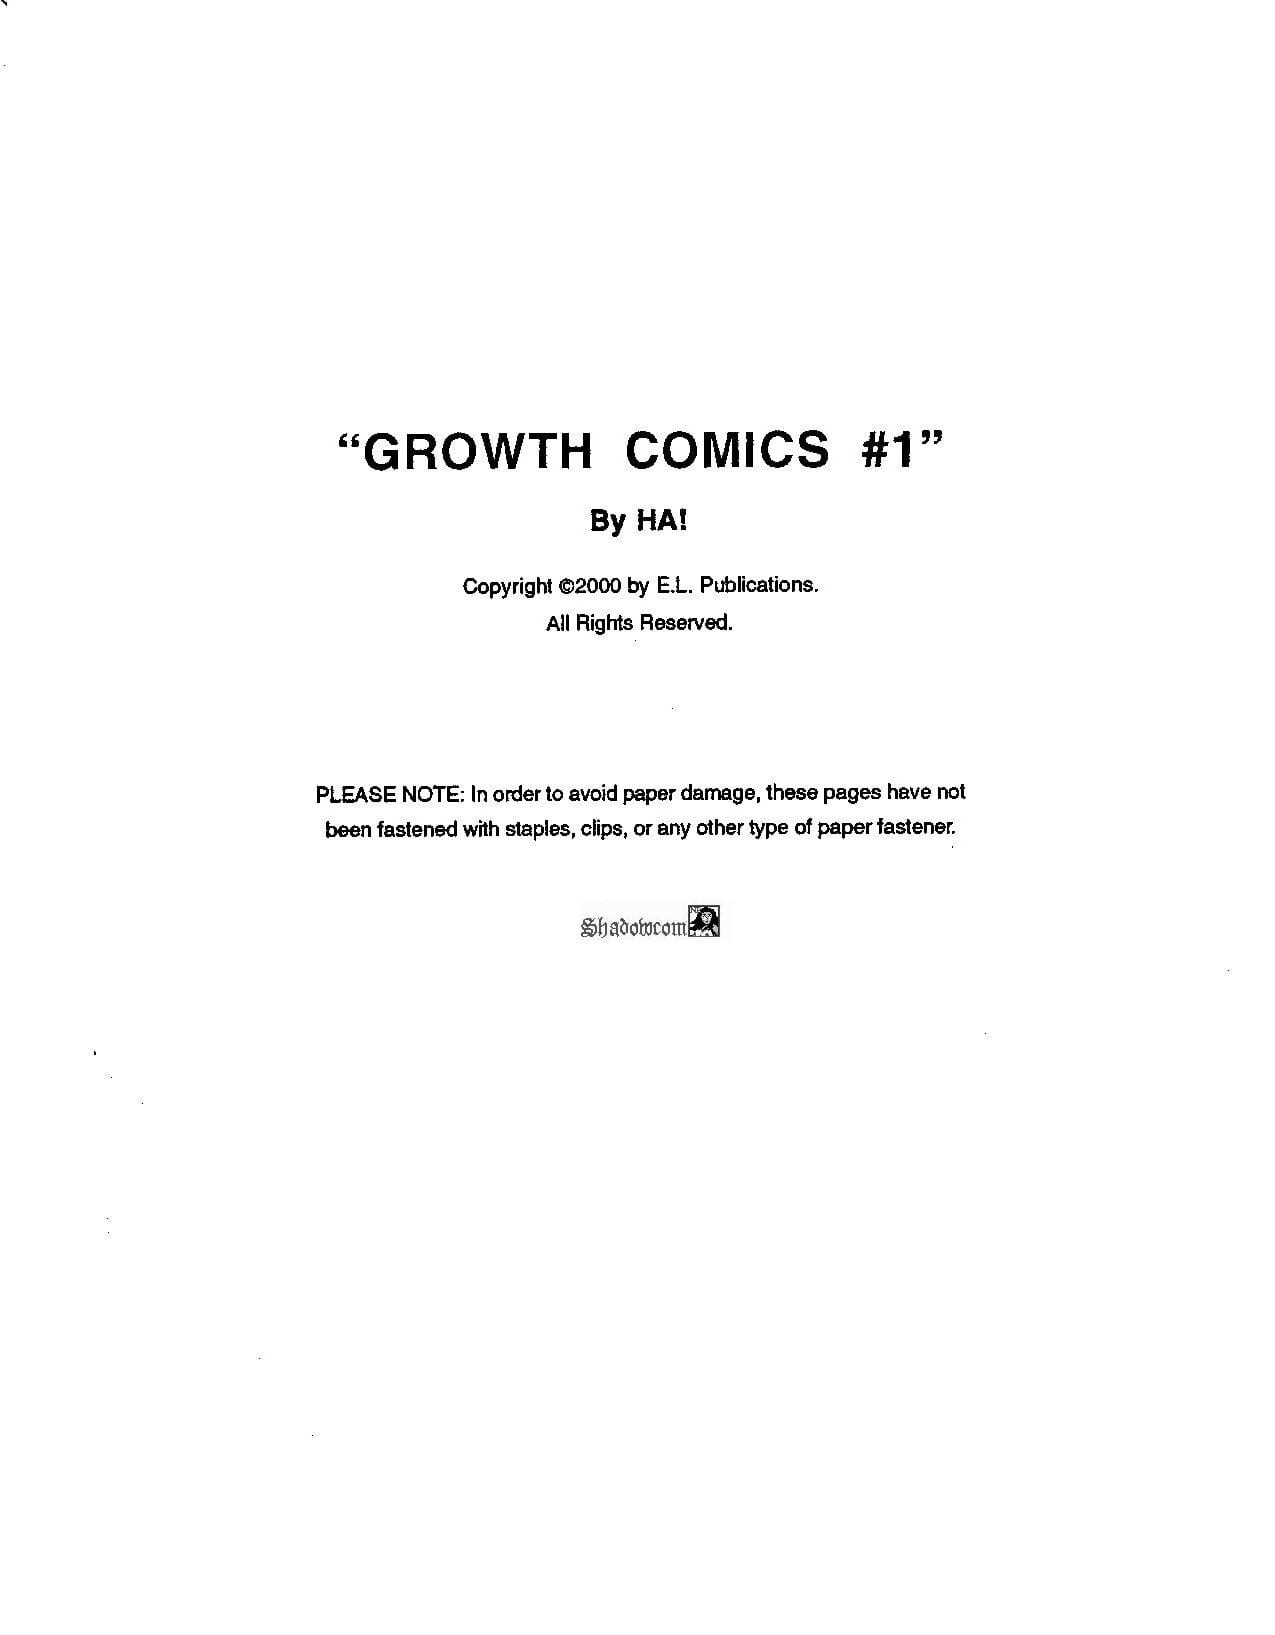 Growth Comics #1 Illustrated comic-story #1 page 1